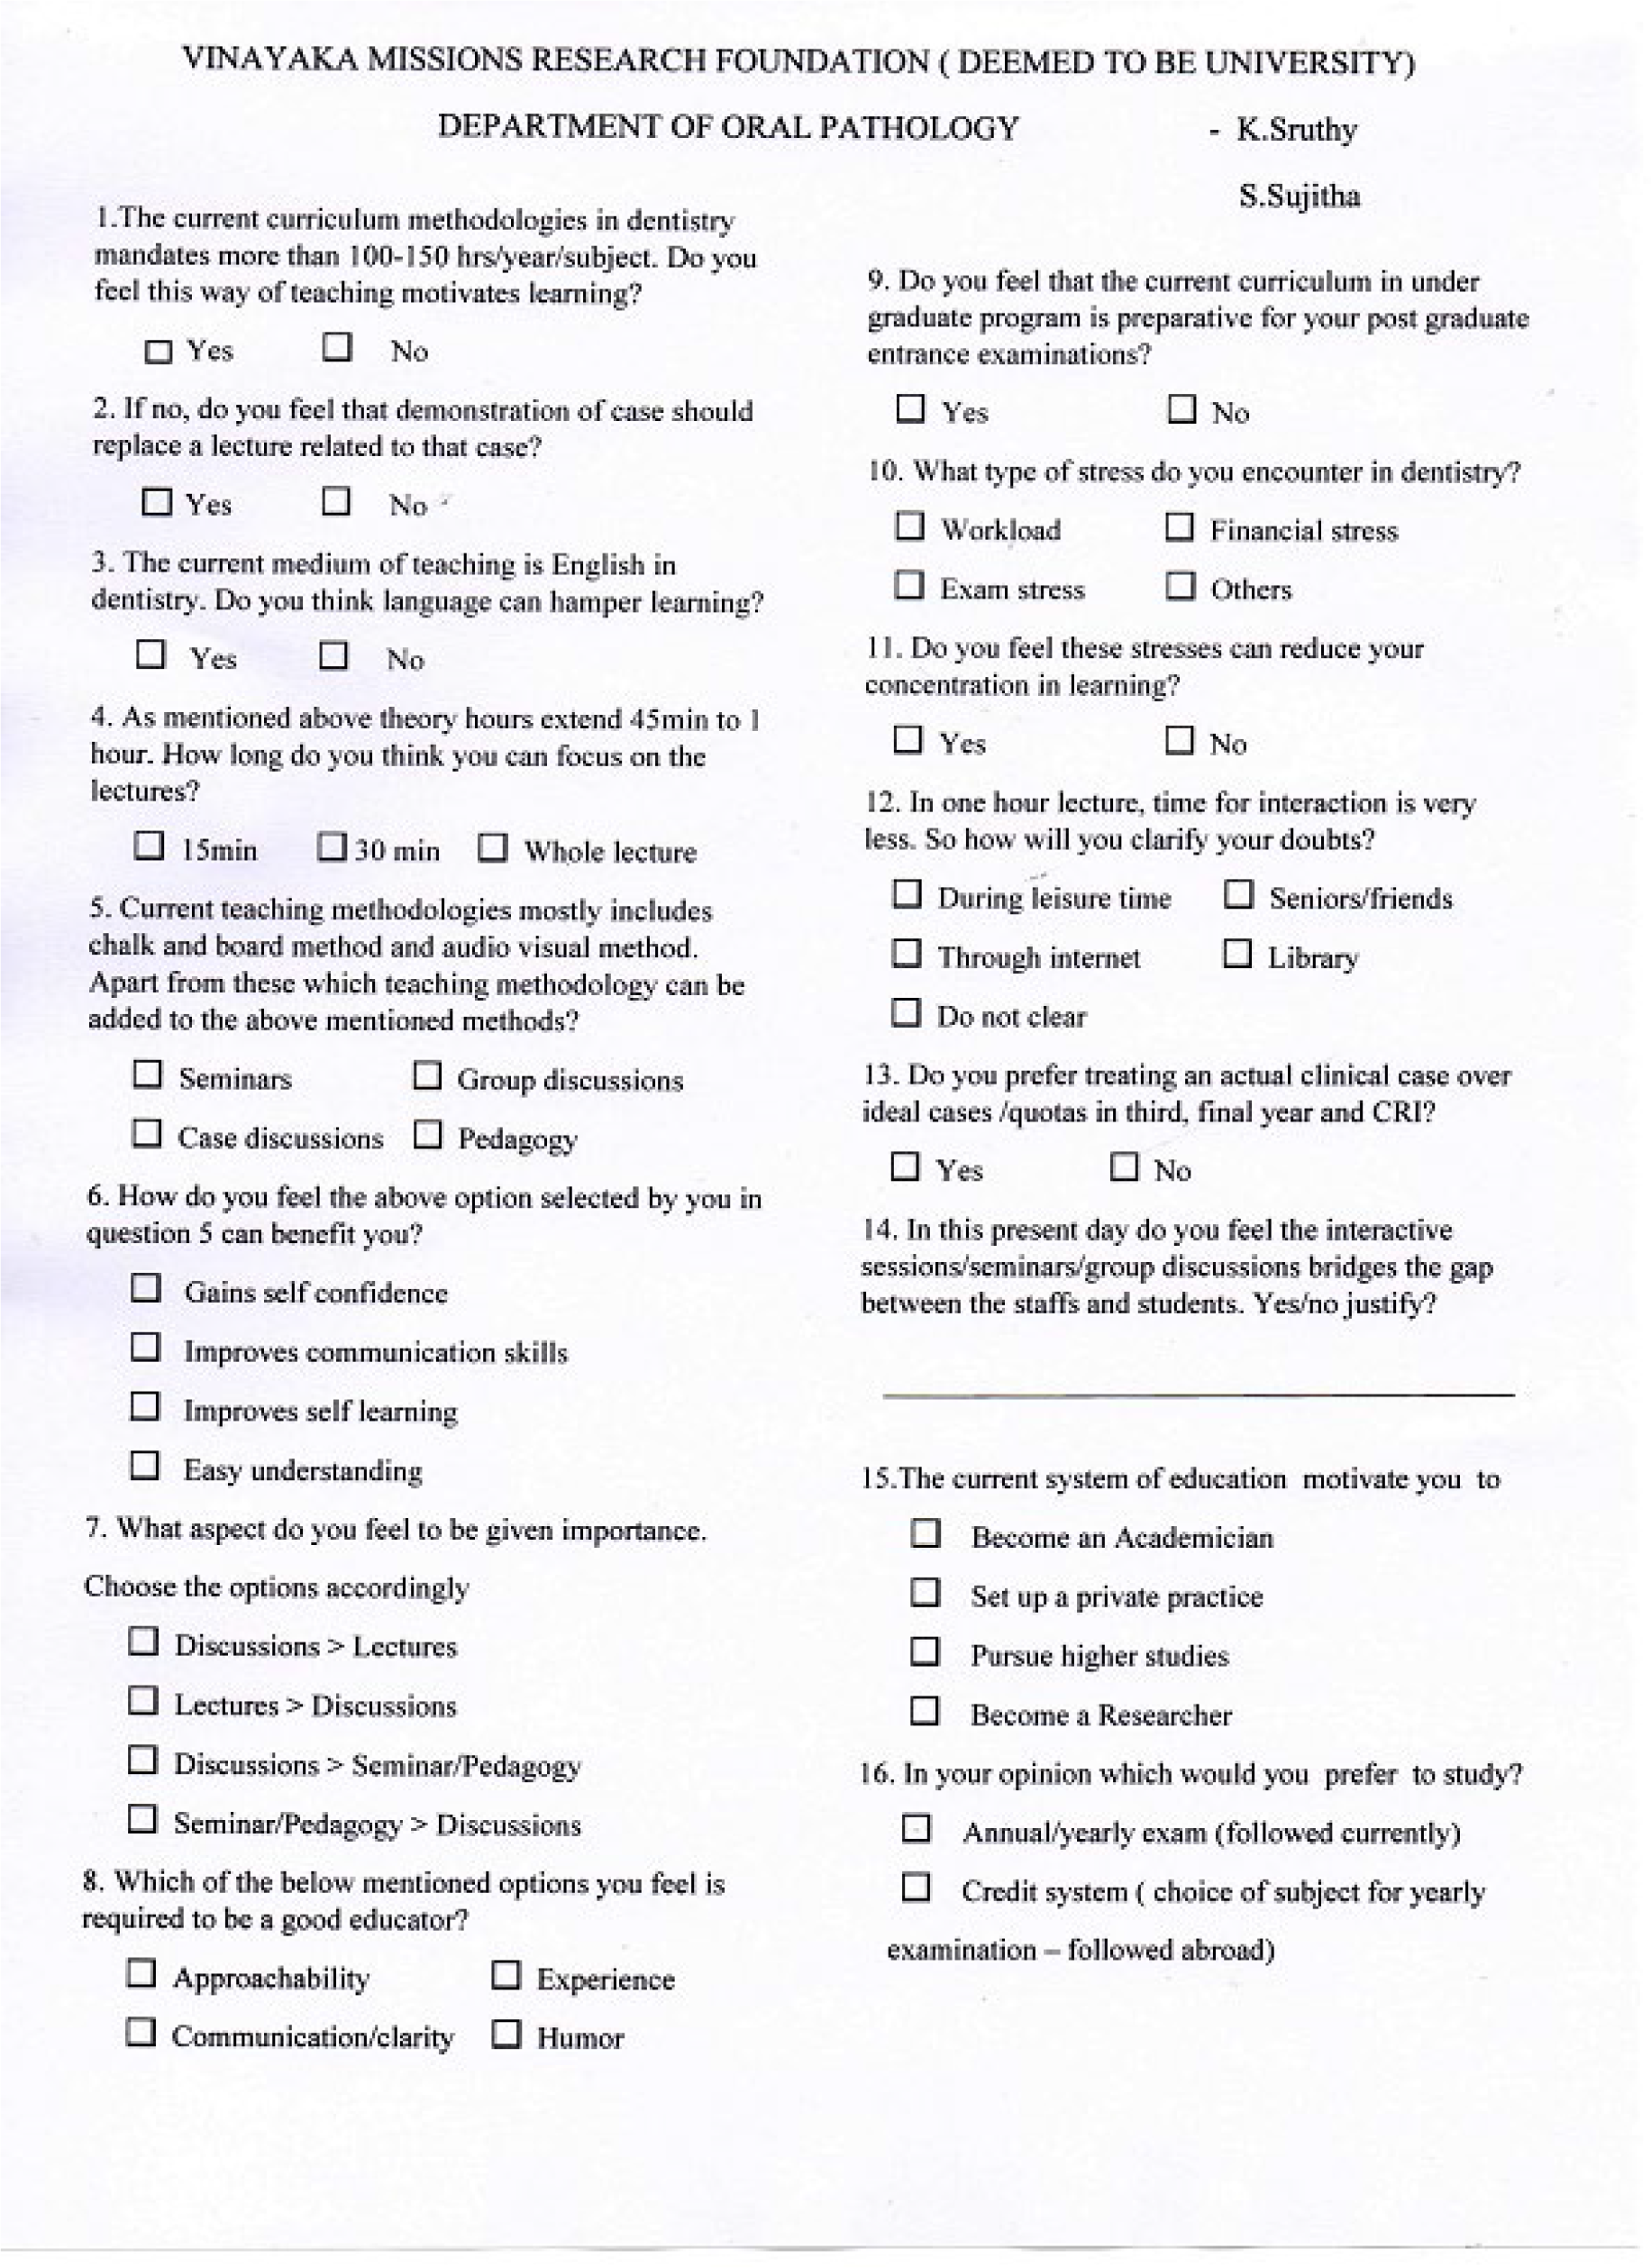 Questionnaire for students.